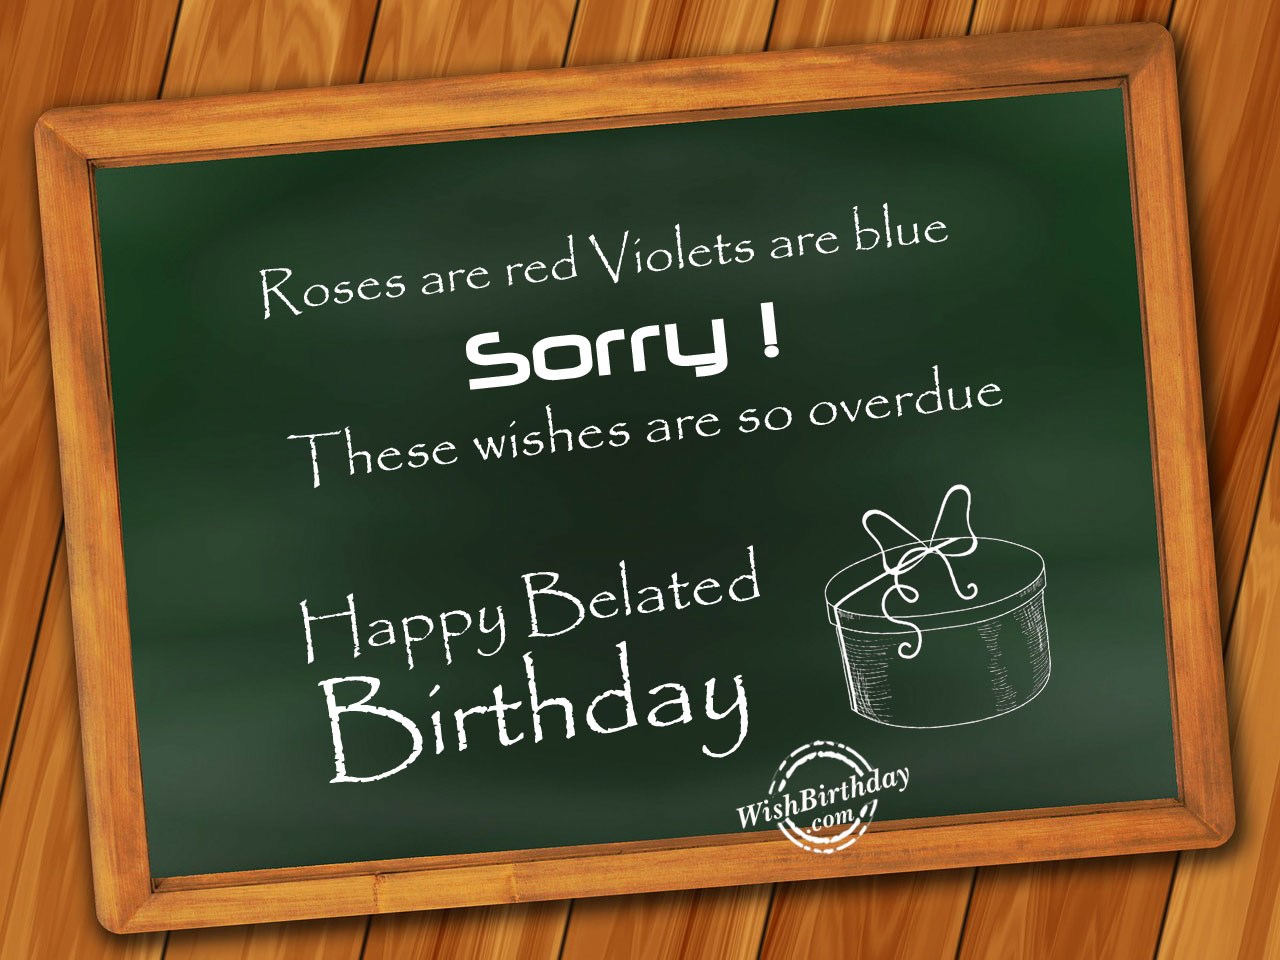 Roses are red violets are blue - Birthday Wishes, Happy Birthday ...